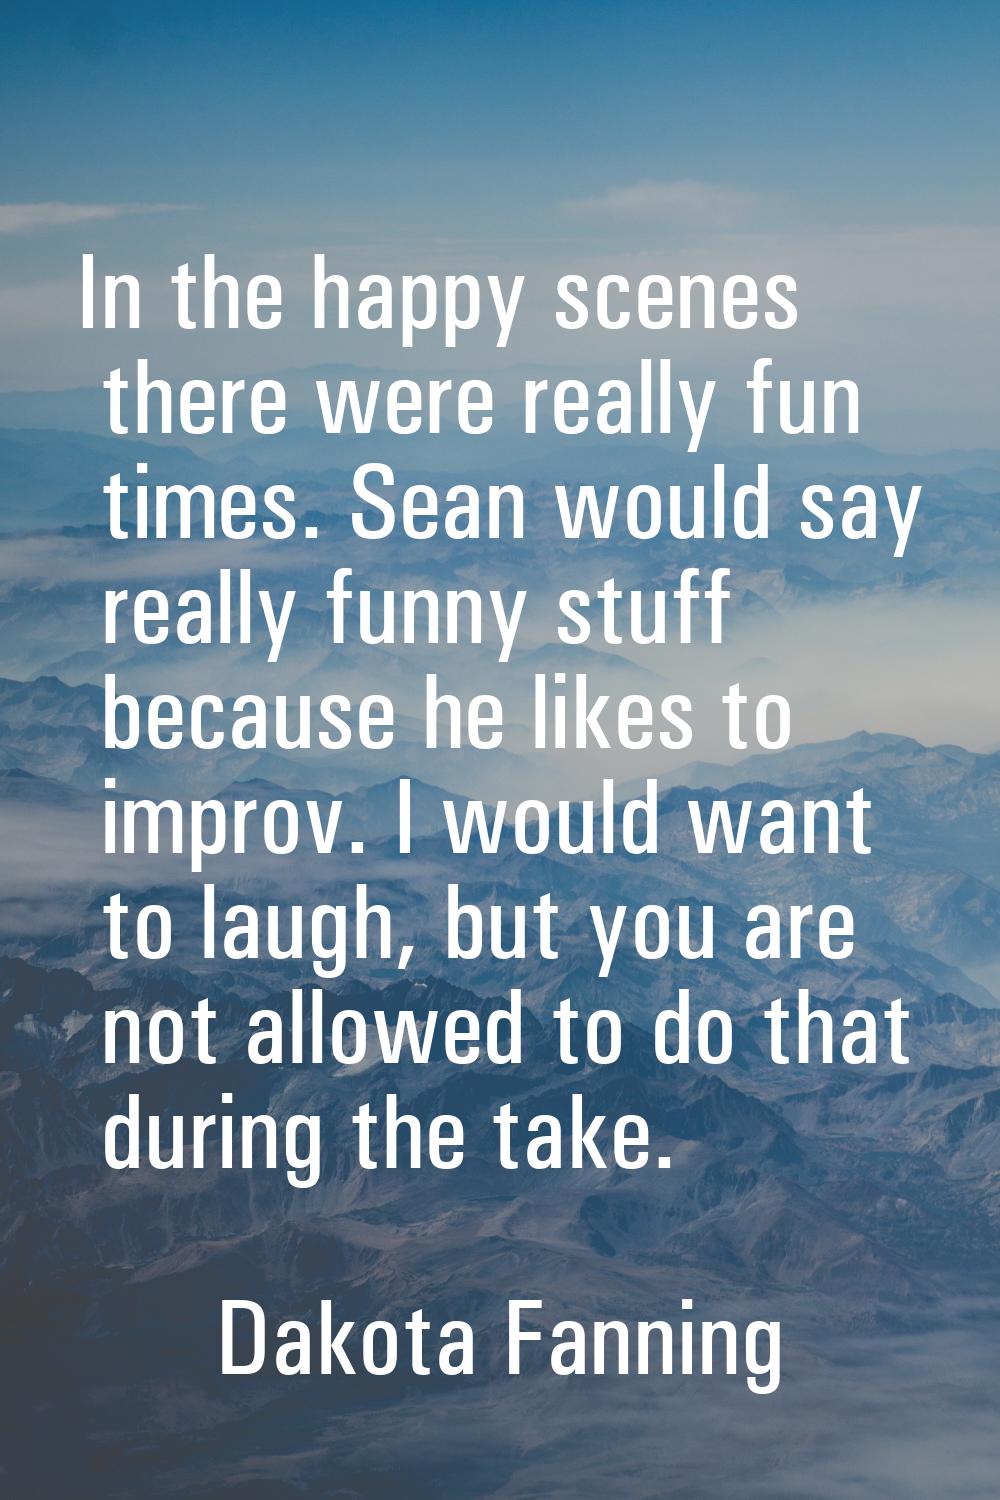 In the happy scenes there were really fun times. Sean would say really funny stuff because he likes